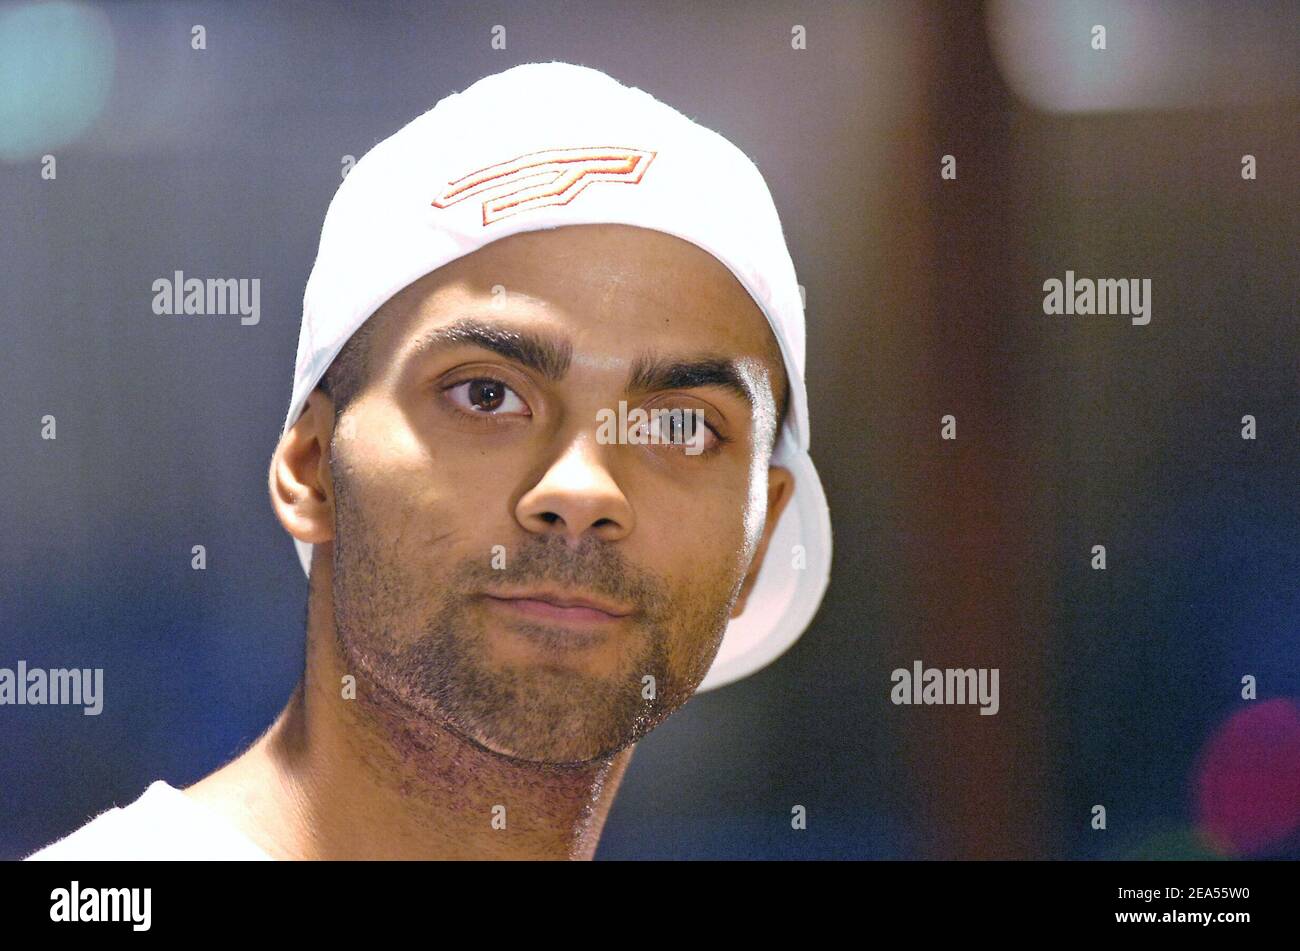 French basket player Tony Parker of San Antonio Spurs participates to a Powerade party in Issy-les-Moulineaux, near Paris, in France, on September 27, 2005. Photo by Nicolas Gouhier /CAMELEON/ABACAPRESS.COM Stock Photo